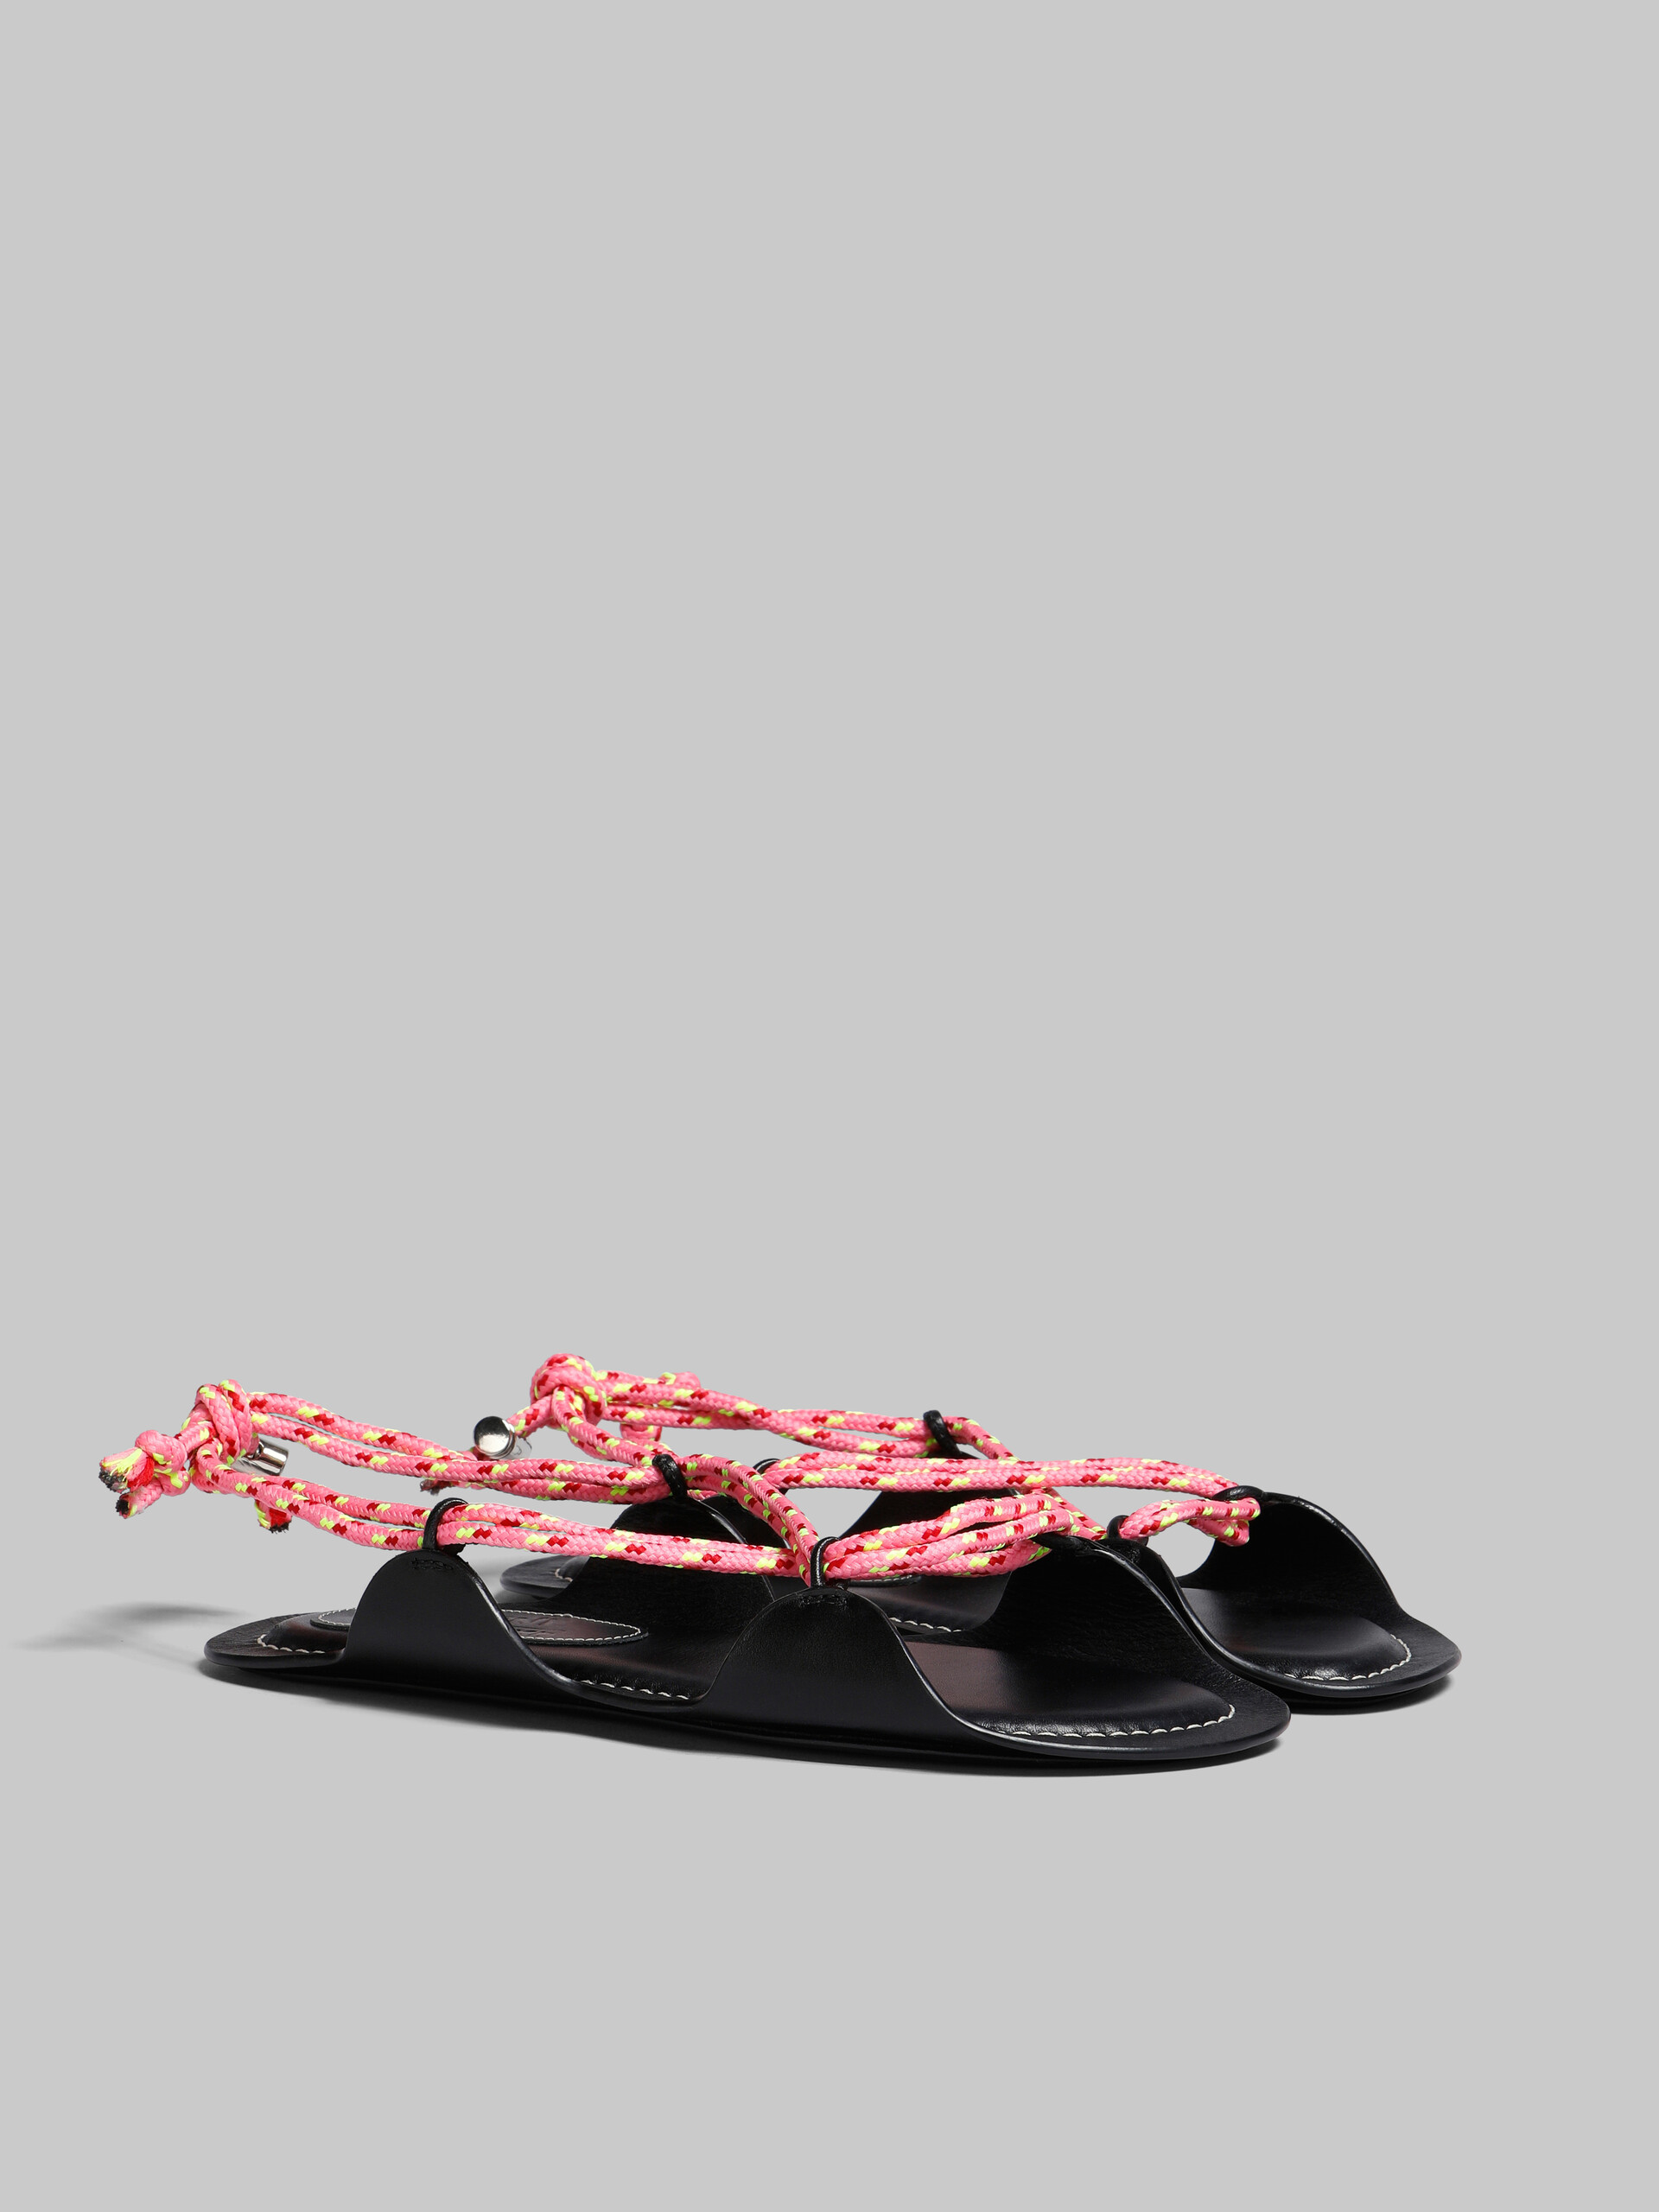 Marni x No Vacancy Inn - Black leather sandals with multicolour rope - Sandals - Image 2